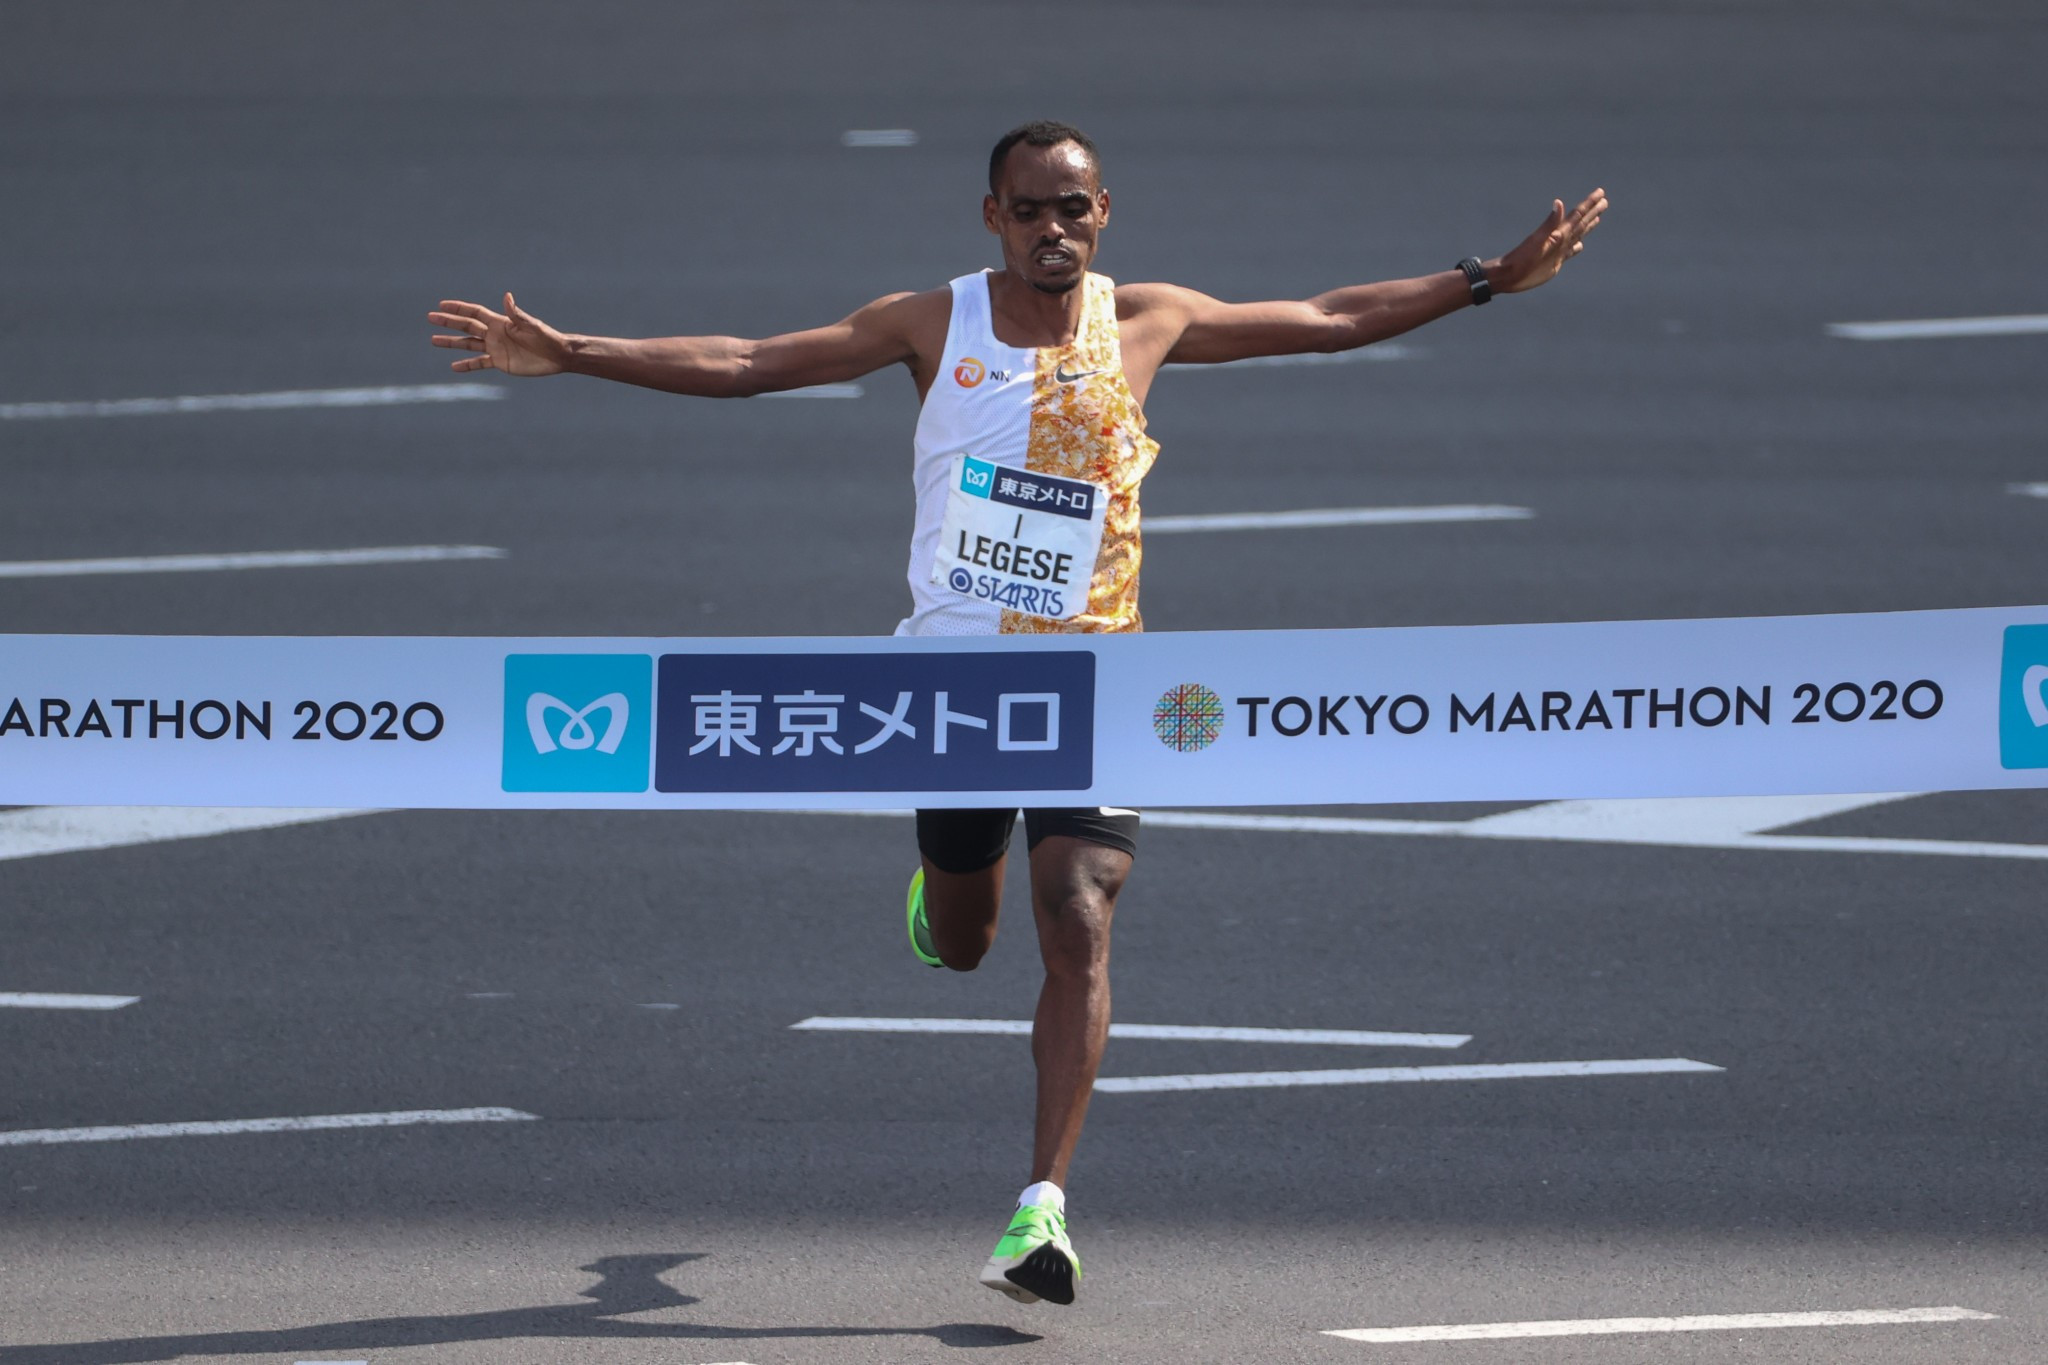 Tokyo Marathon organisers willing to cancel 2021 edition if Government voluntarily requests move